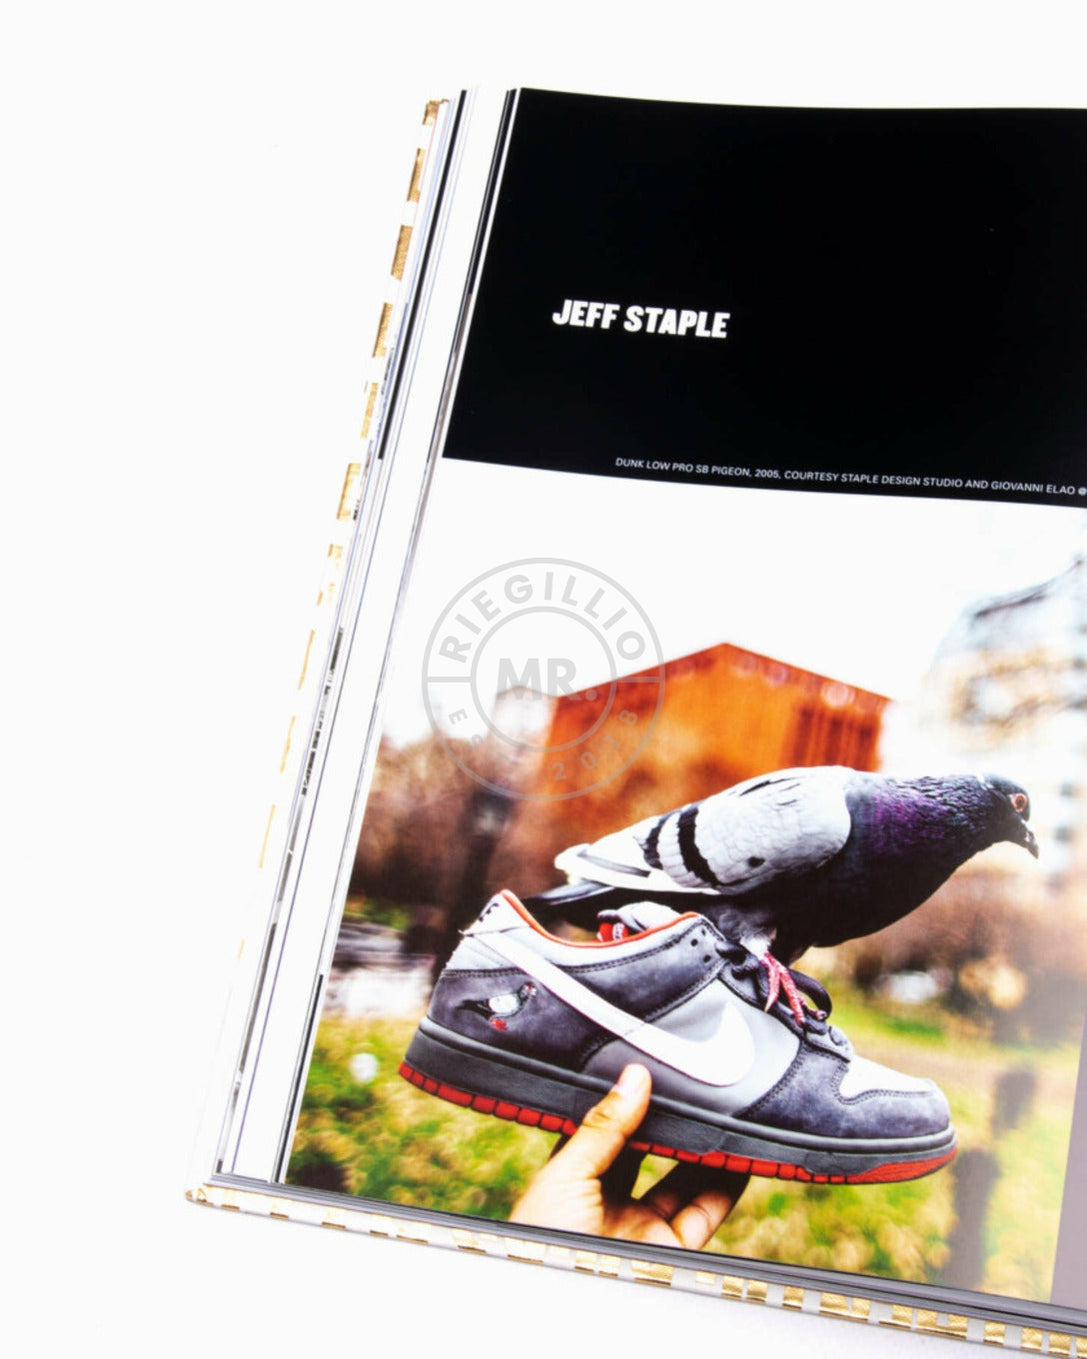 Table Book Out of the box: The rise of the sneaker culture-at MR. Riegillio